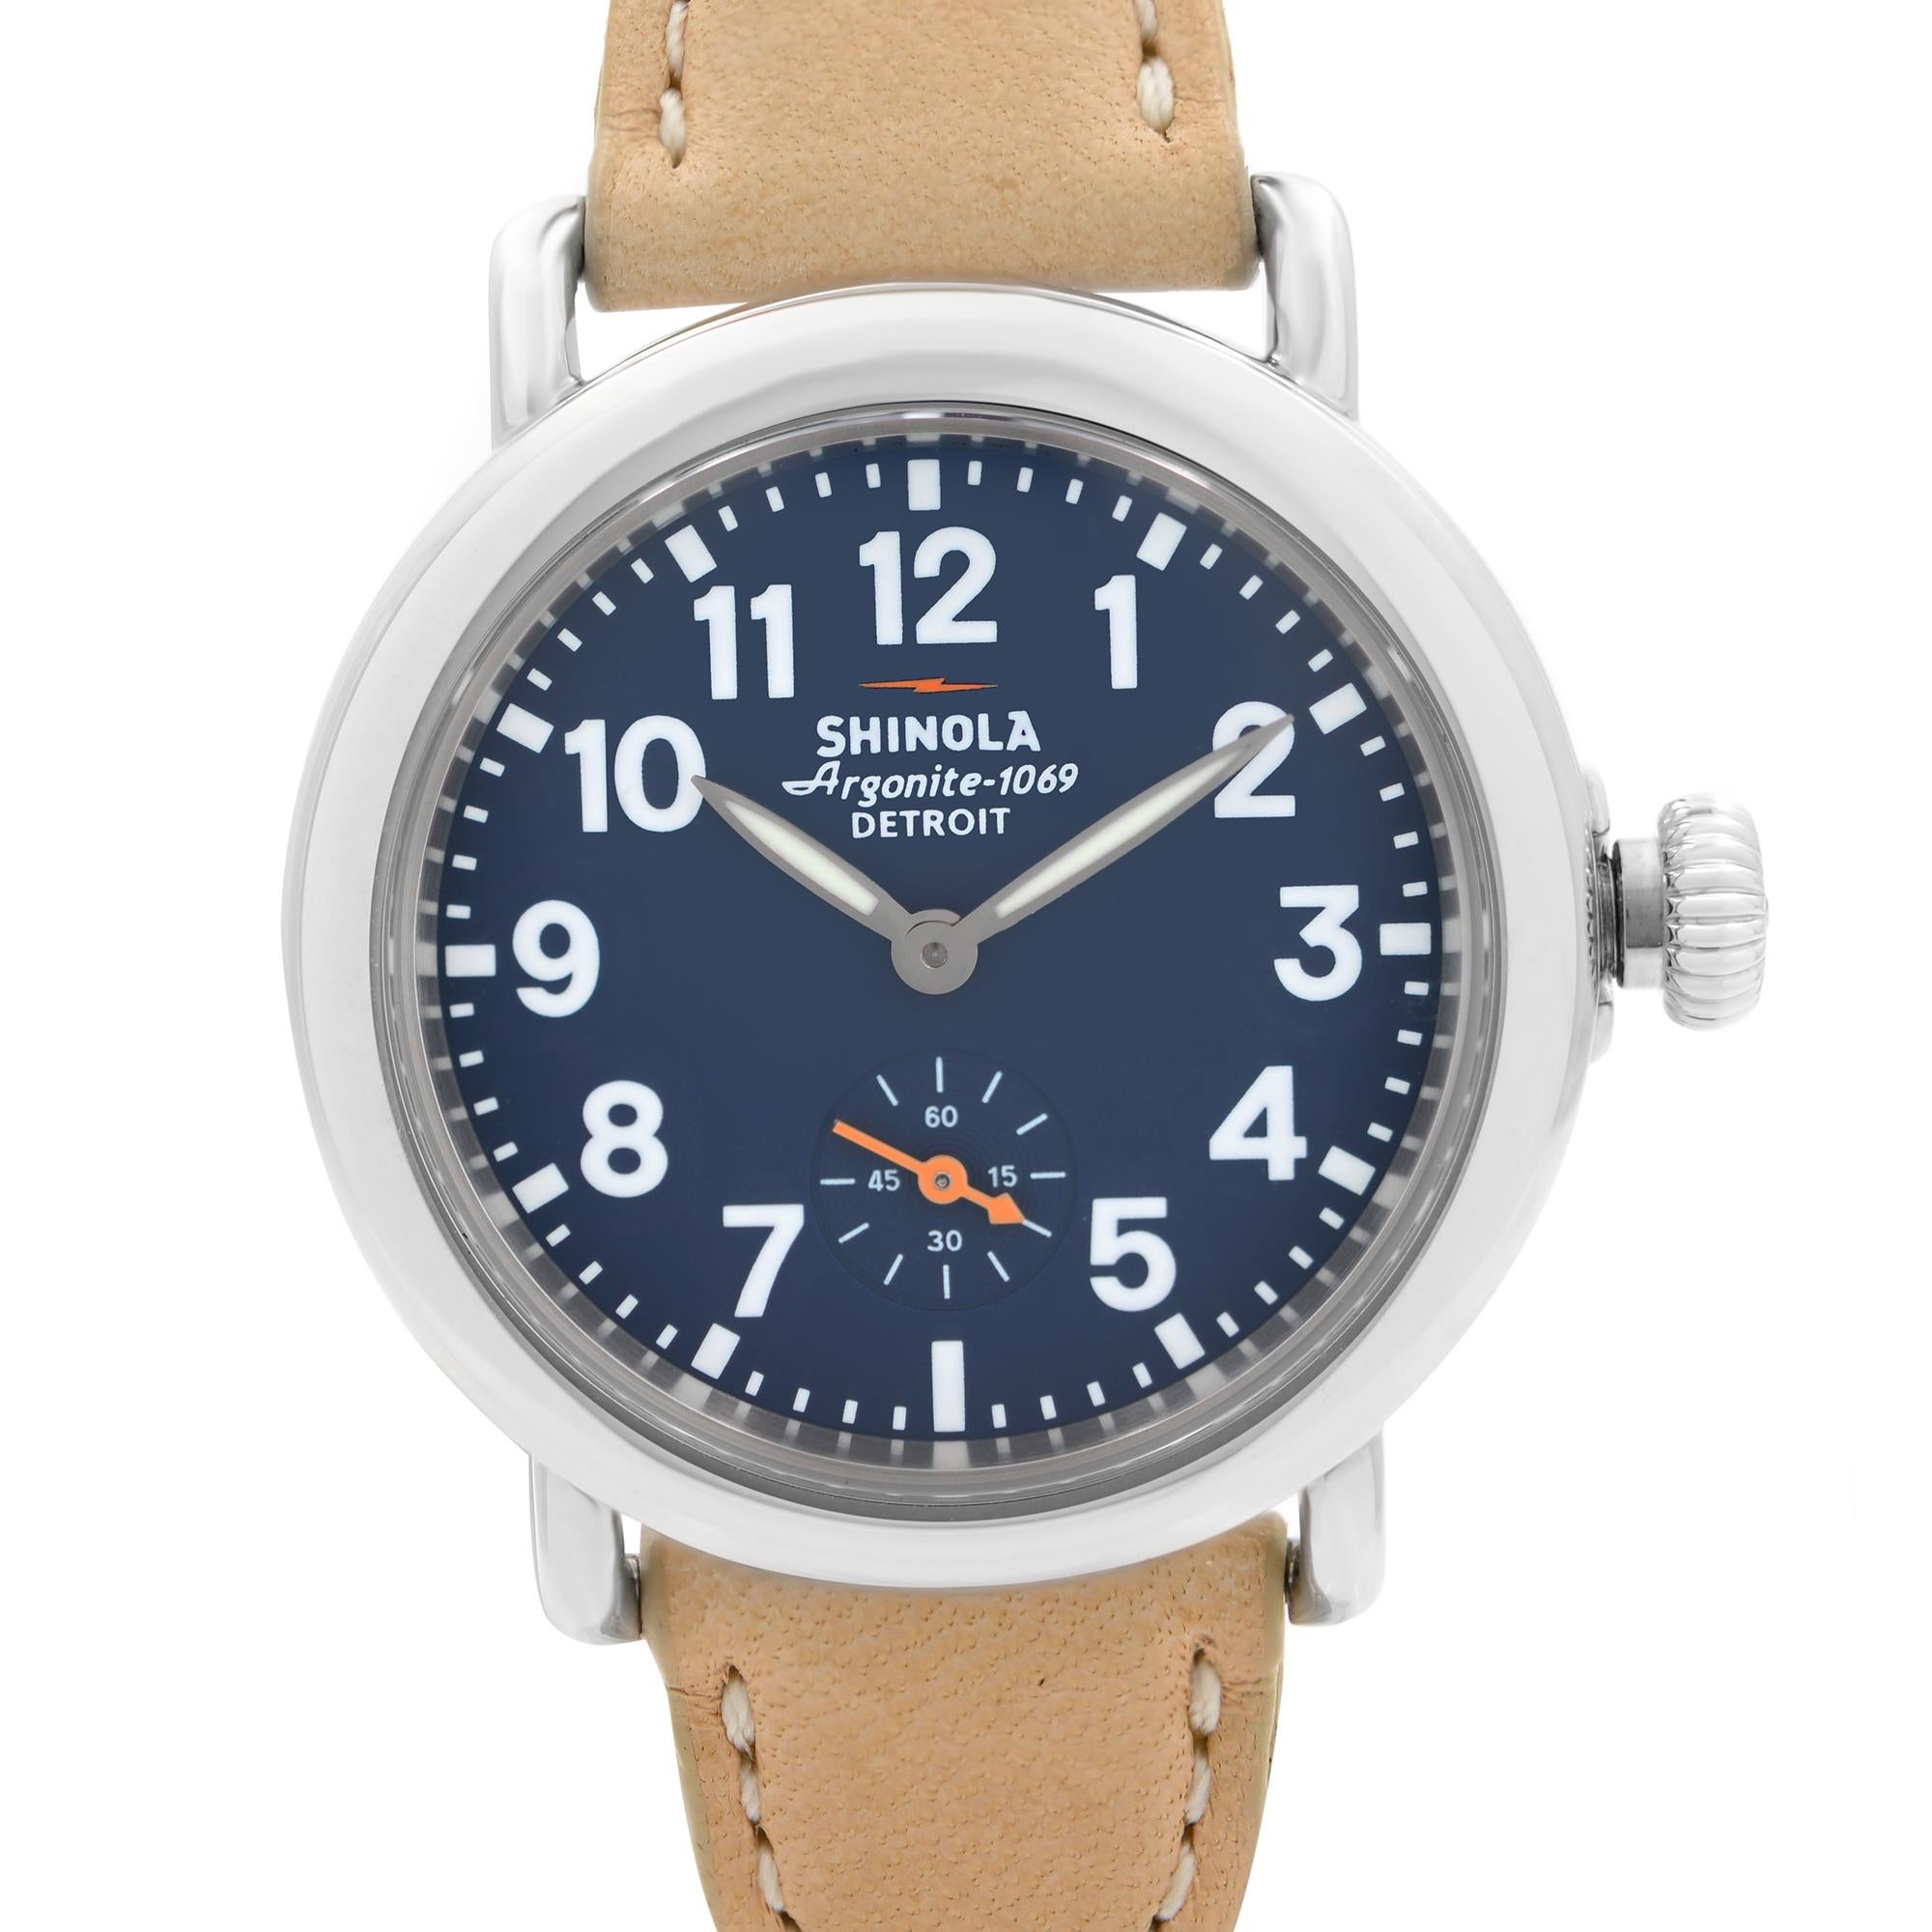 Excellent Pre-Owned Condition Shinola The Runwell 36mm Triple Wrap Midnight Dial Quartz Ladies Watch 11000260. The Timepiece Has a Few Paint Cracks on the Edges of the Strap as Visible in Pictures. This Beautiful Timepiece Features: Stainless Steel